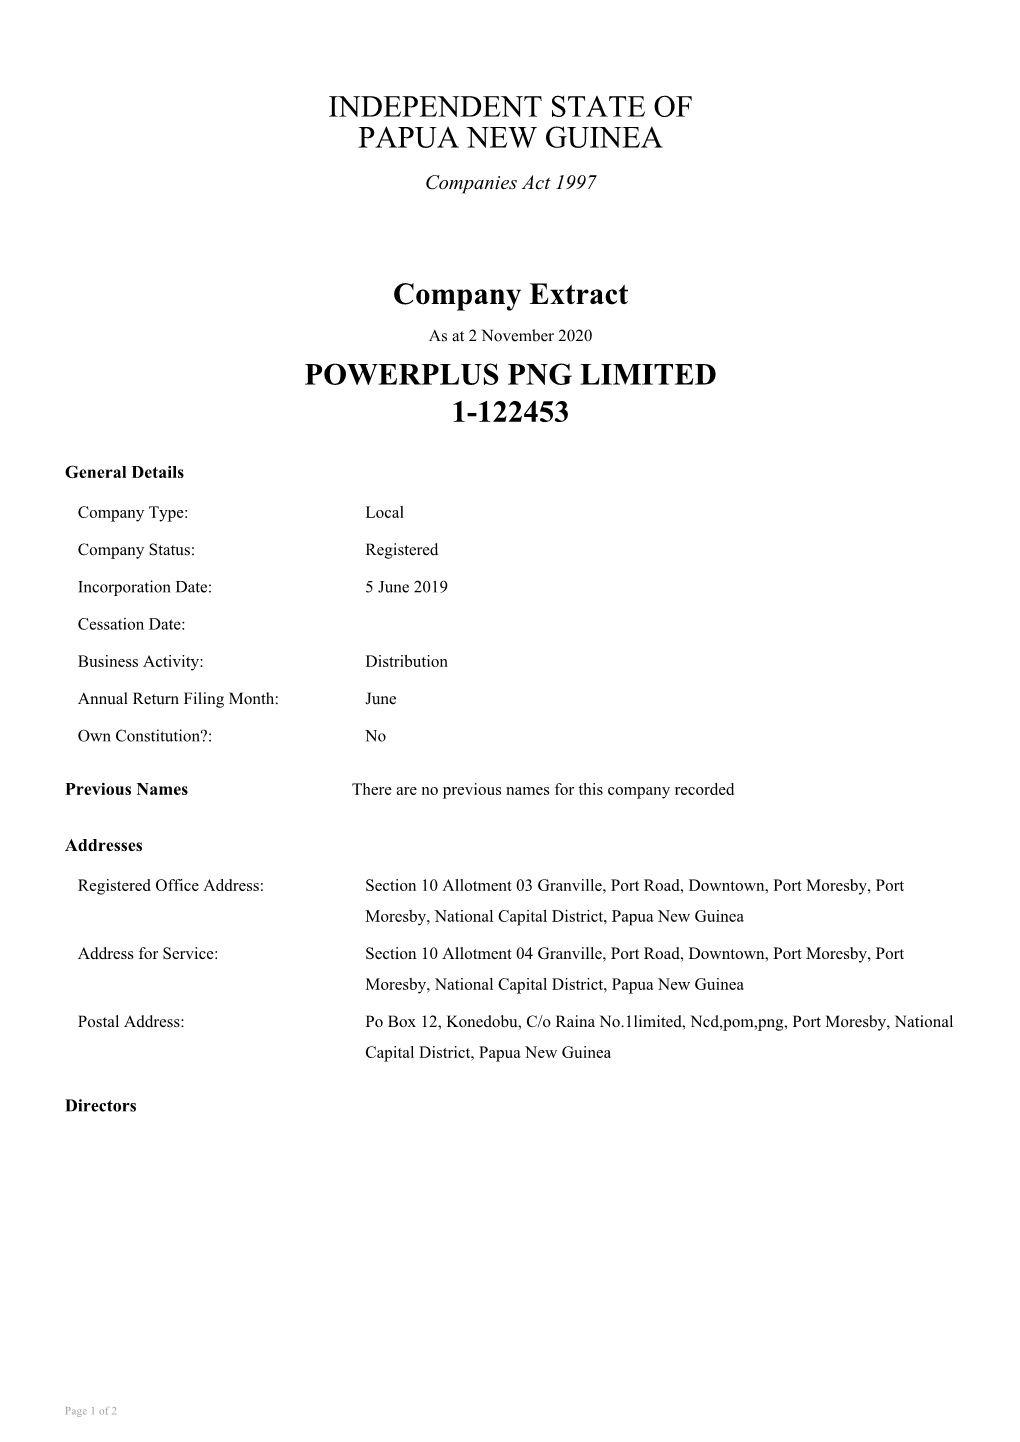 Entity Extract-POWERPLUS PNG LIMITED-1-122453